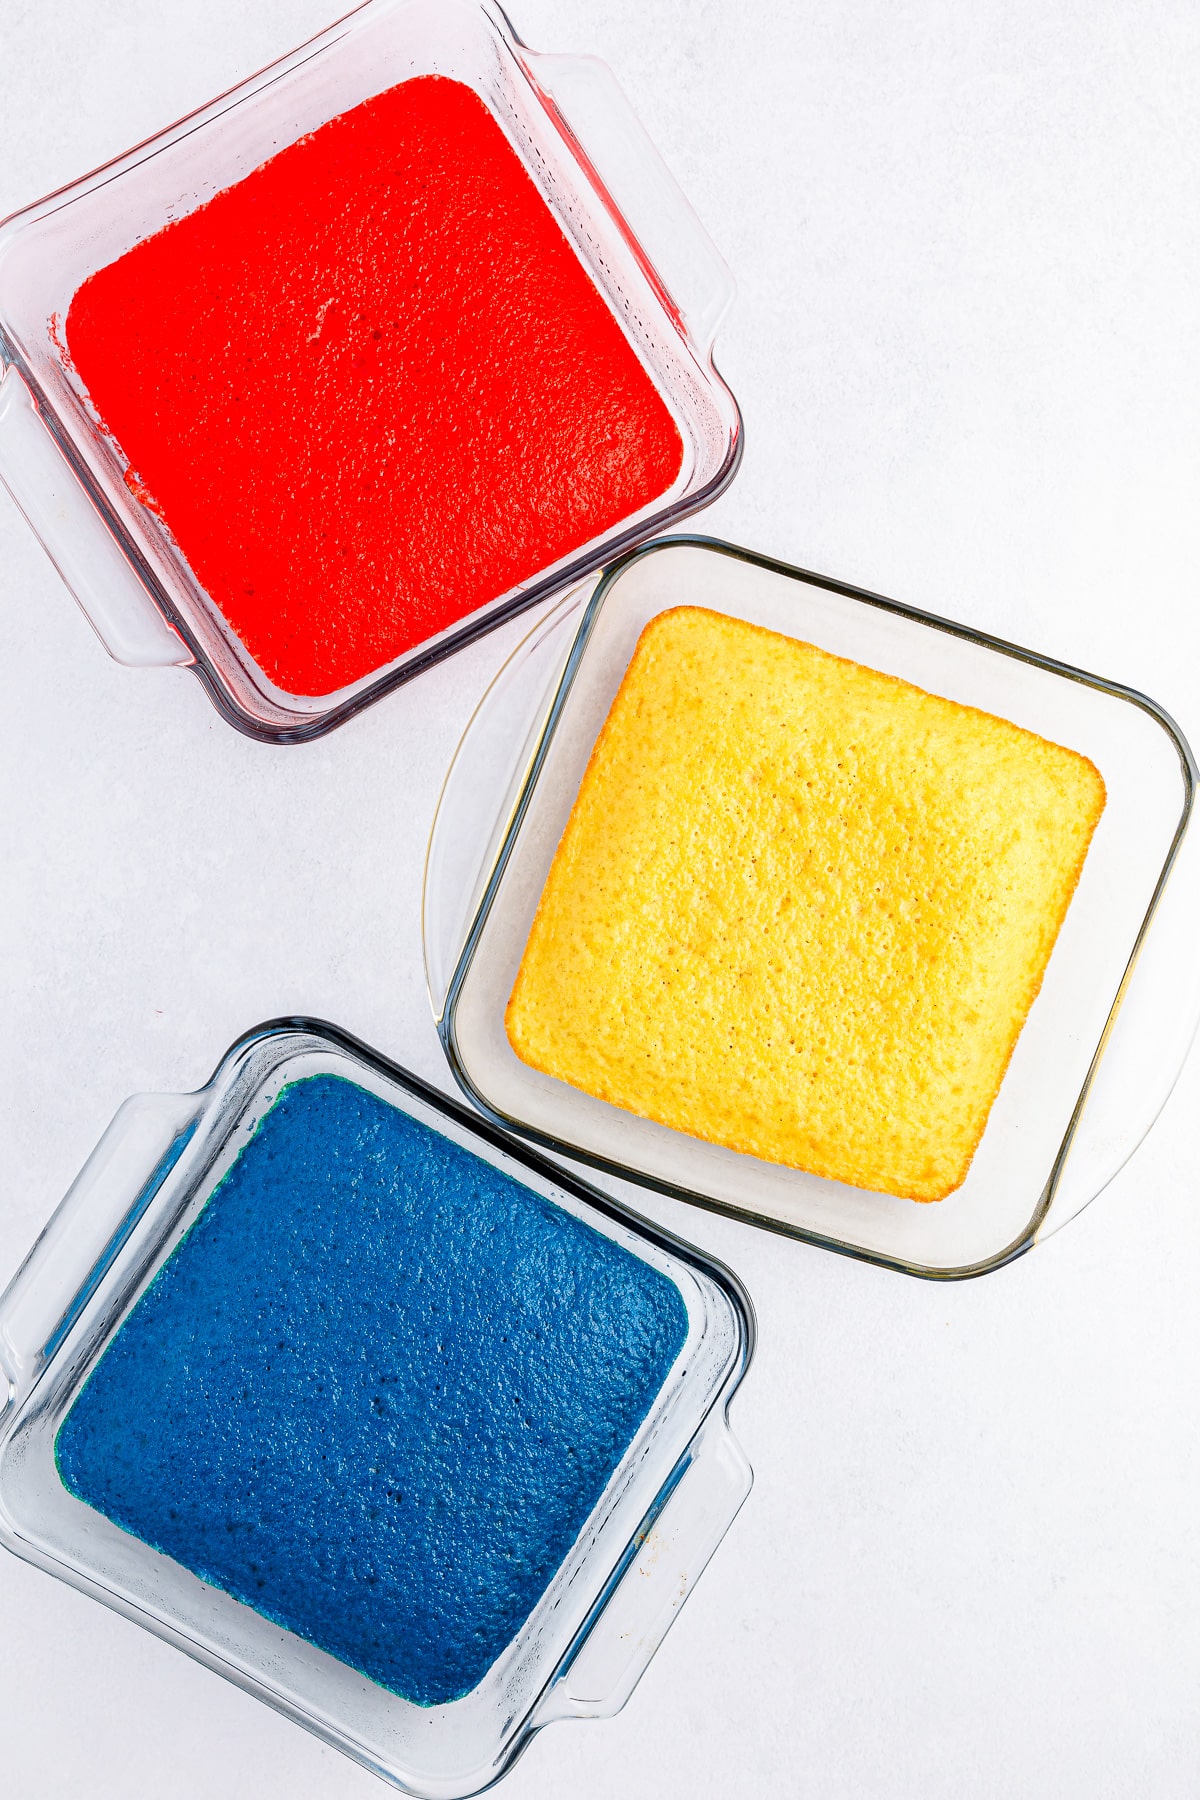 Three cakes cooked in square glass pans from overhead, one red, one white and one blue.